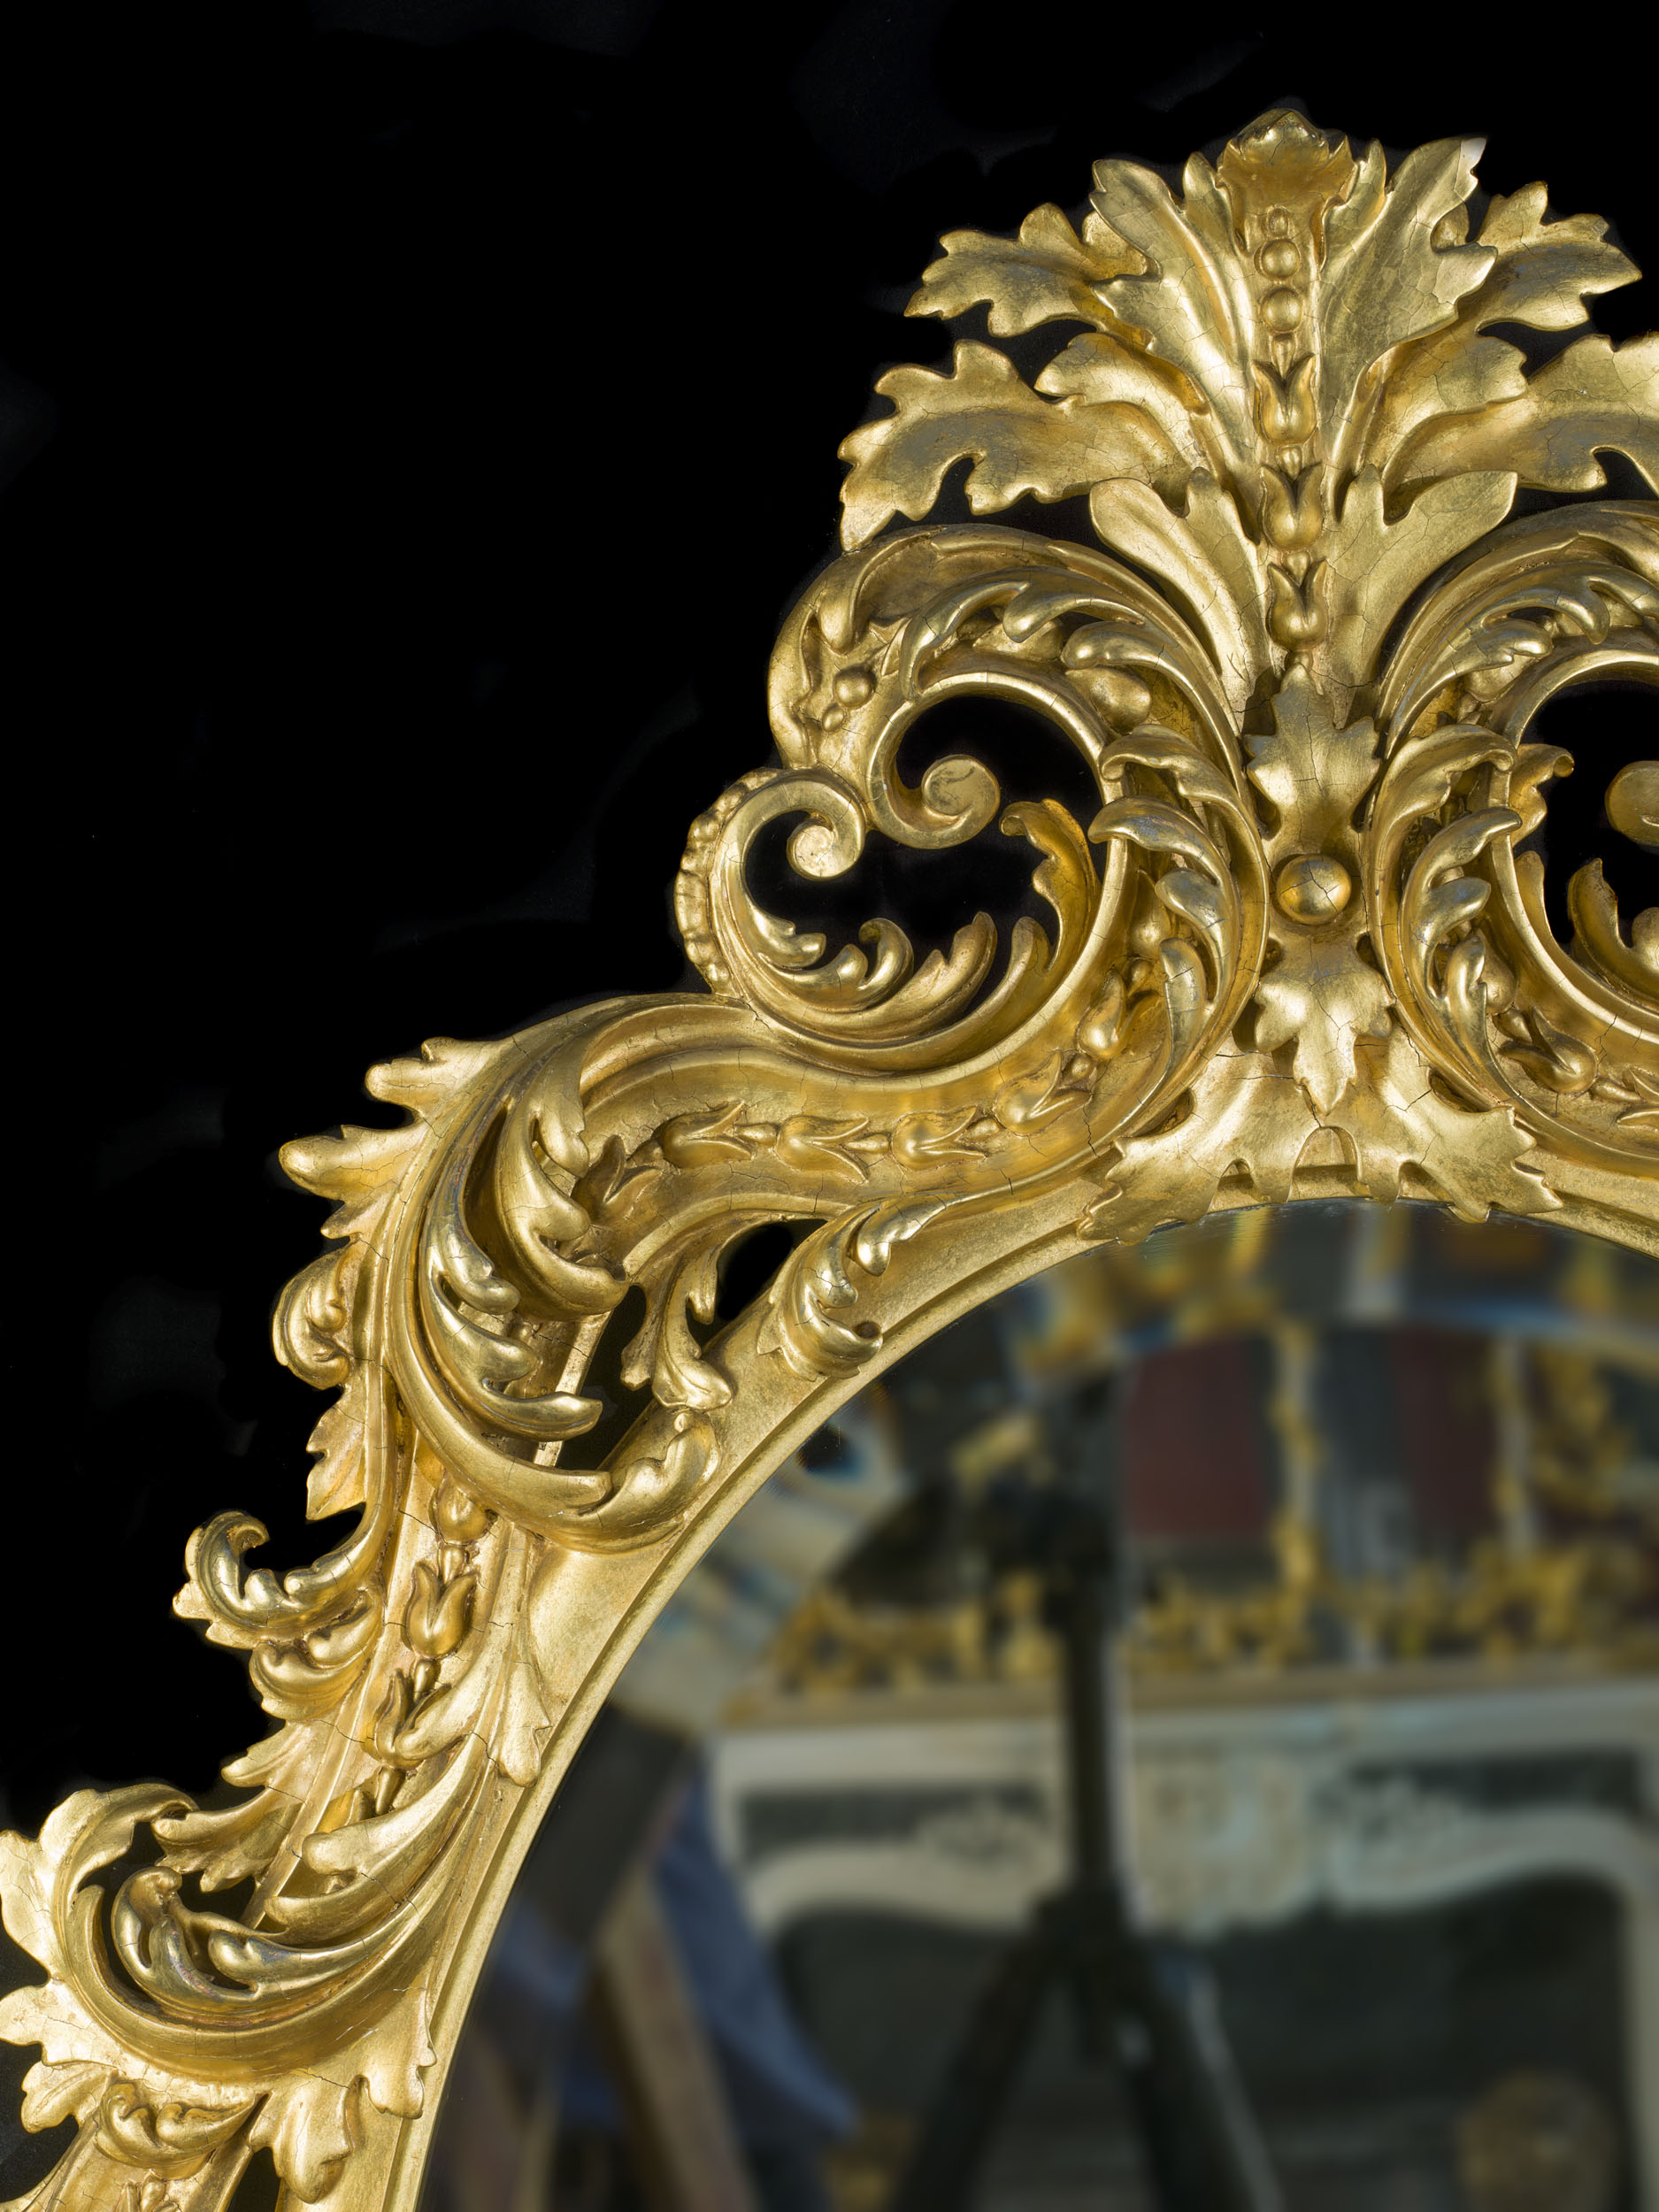 An Ornate Rococo Style Giltwood Wall Mirror